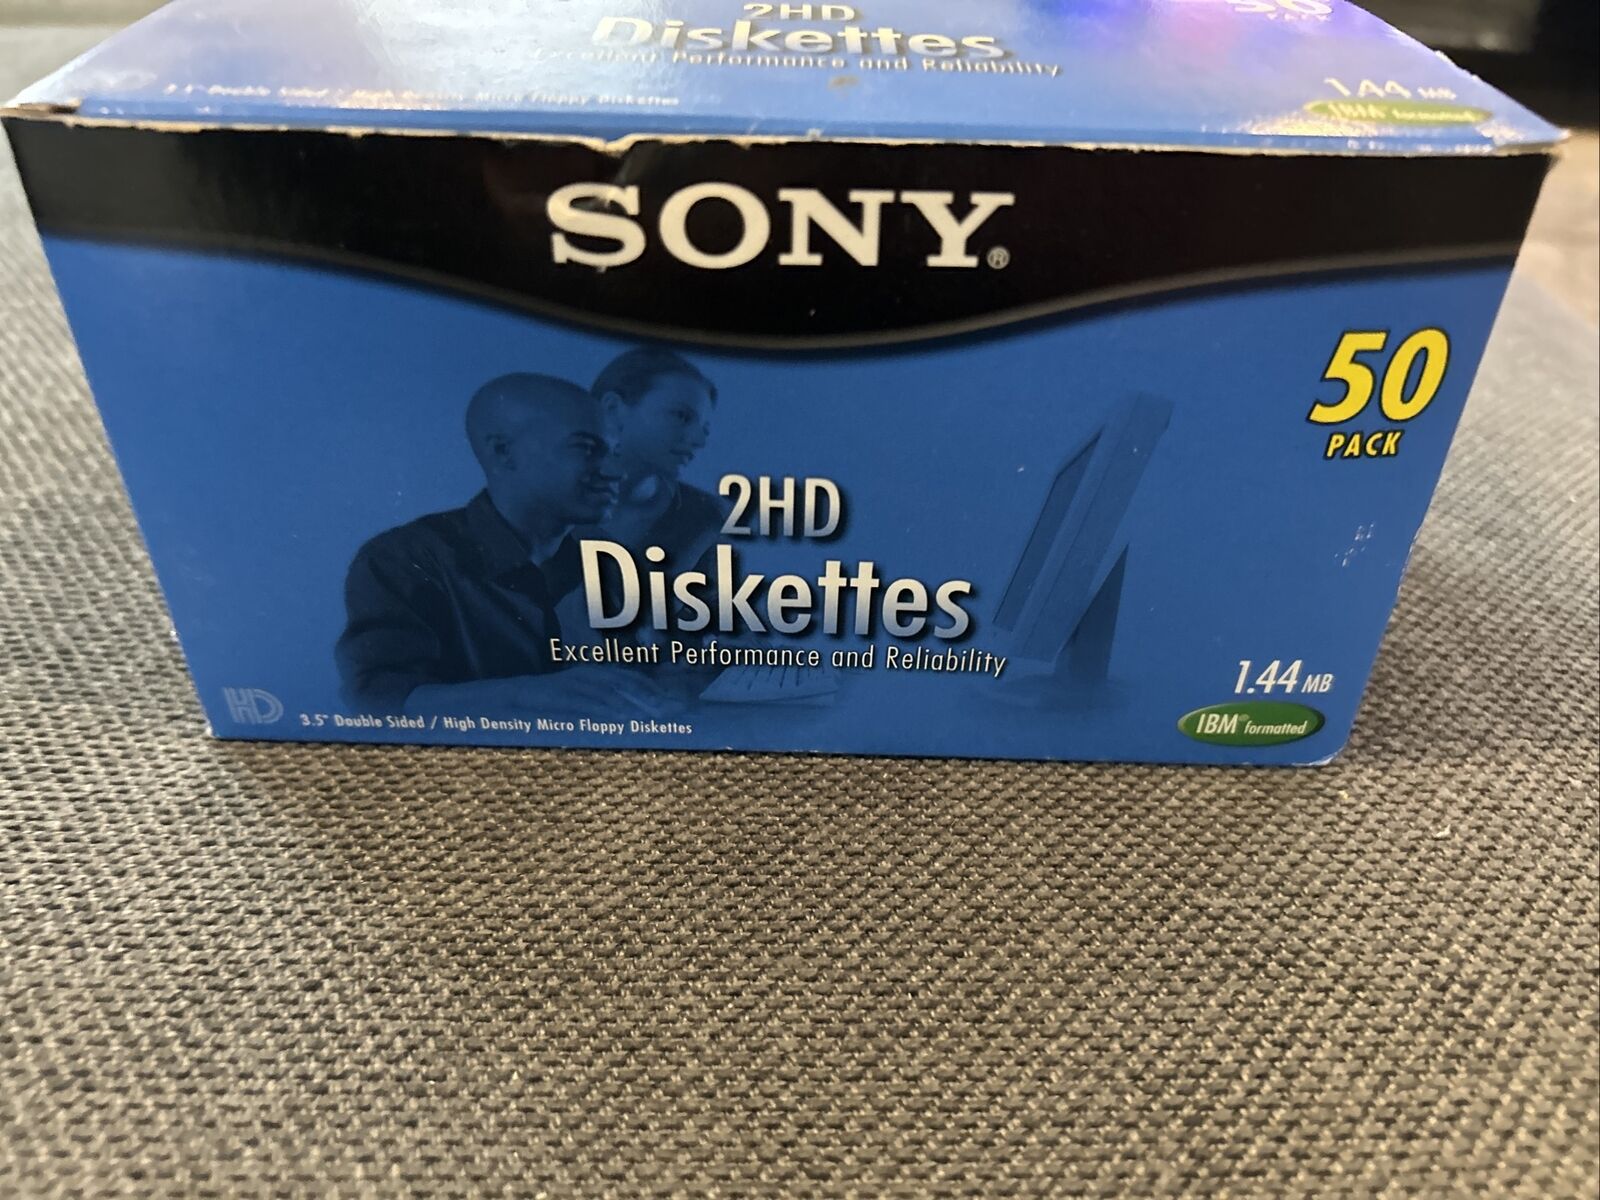 SONY 50MFD 2HD DISKETTES Micro Floppy Disks 3.5